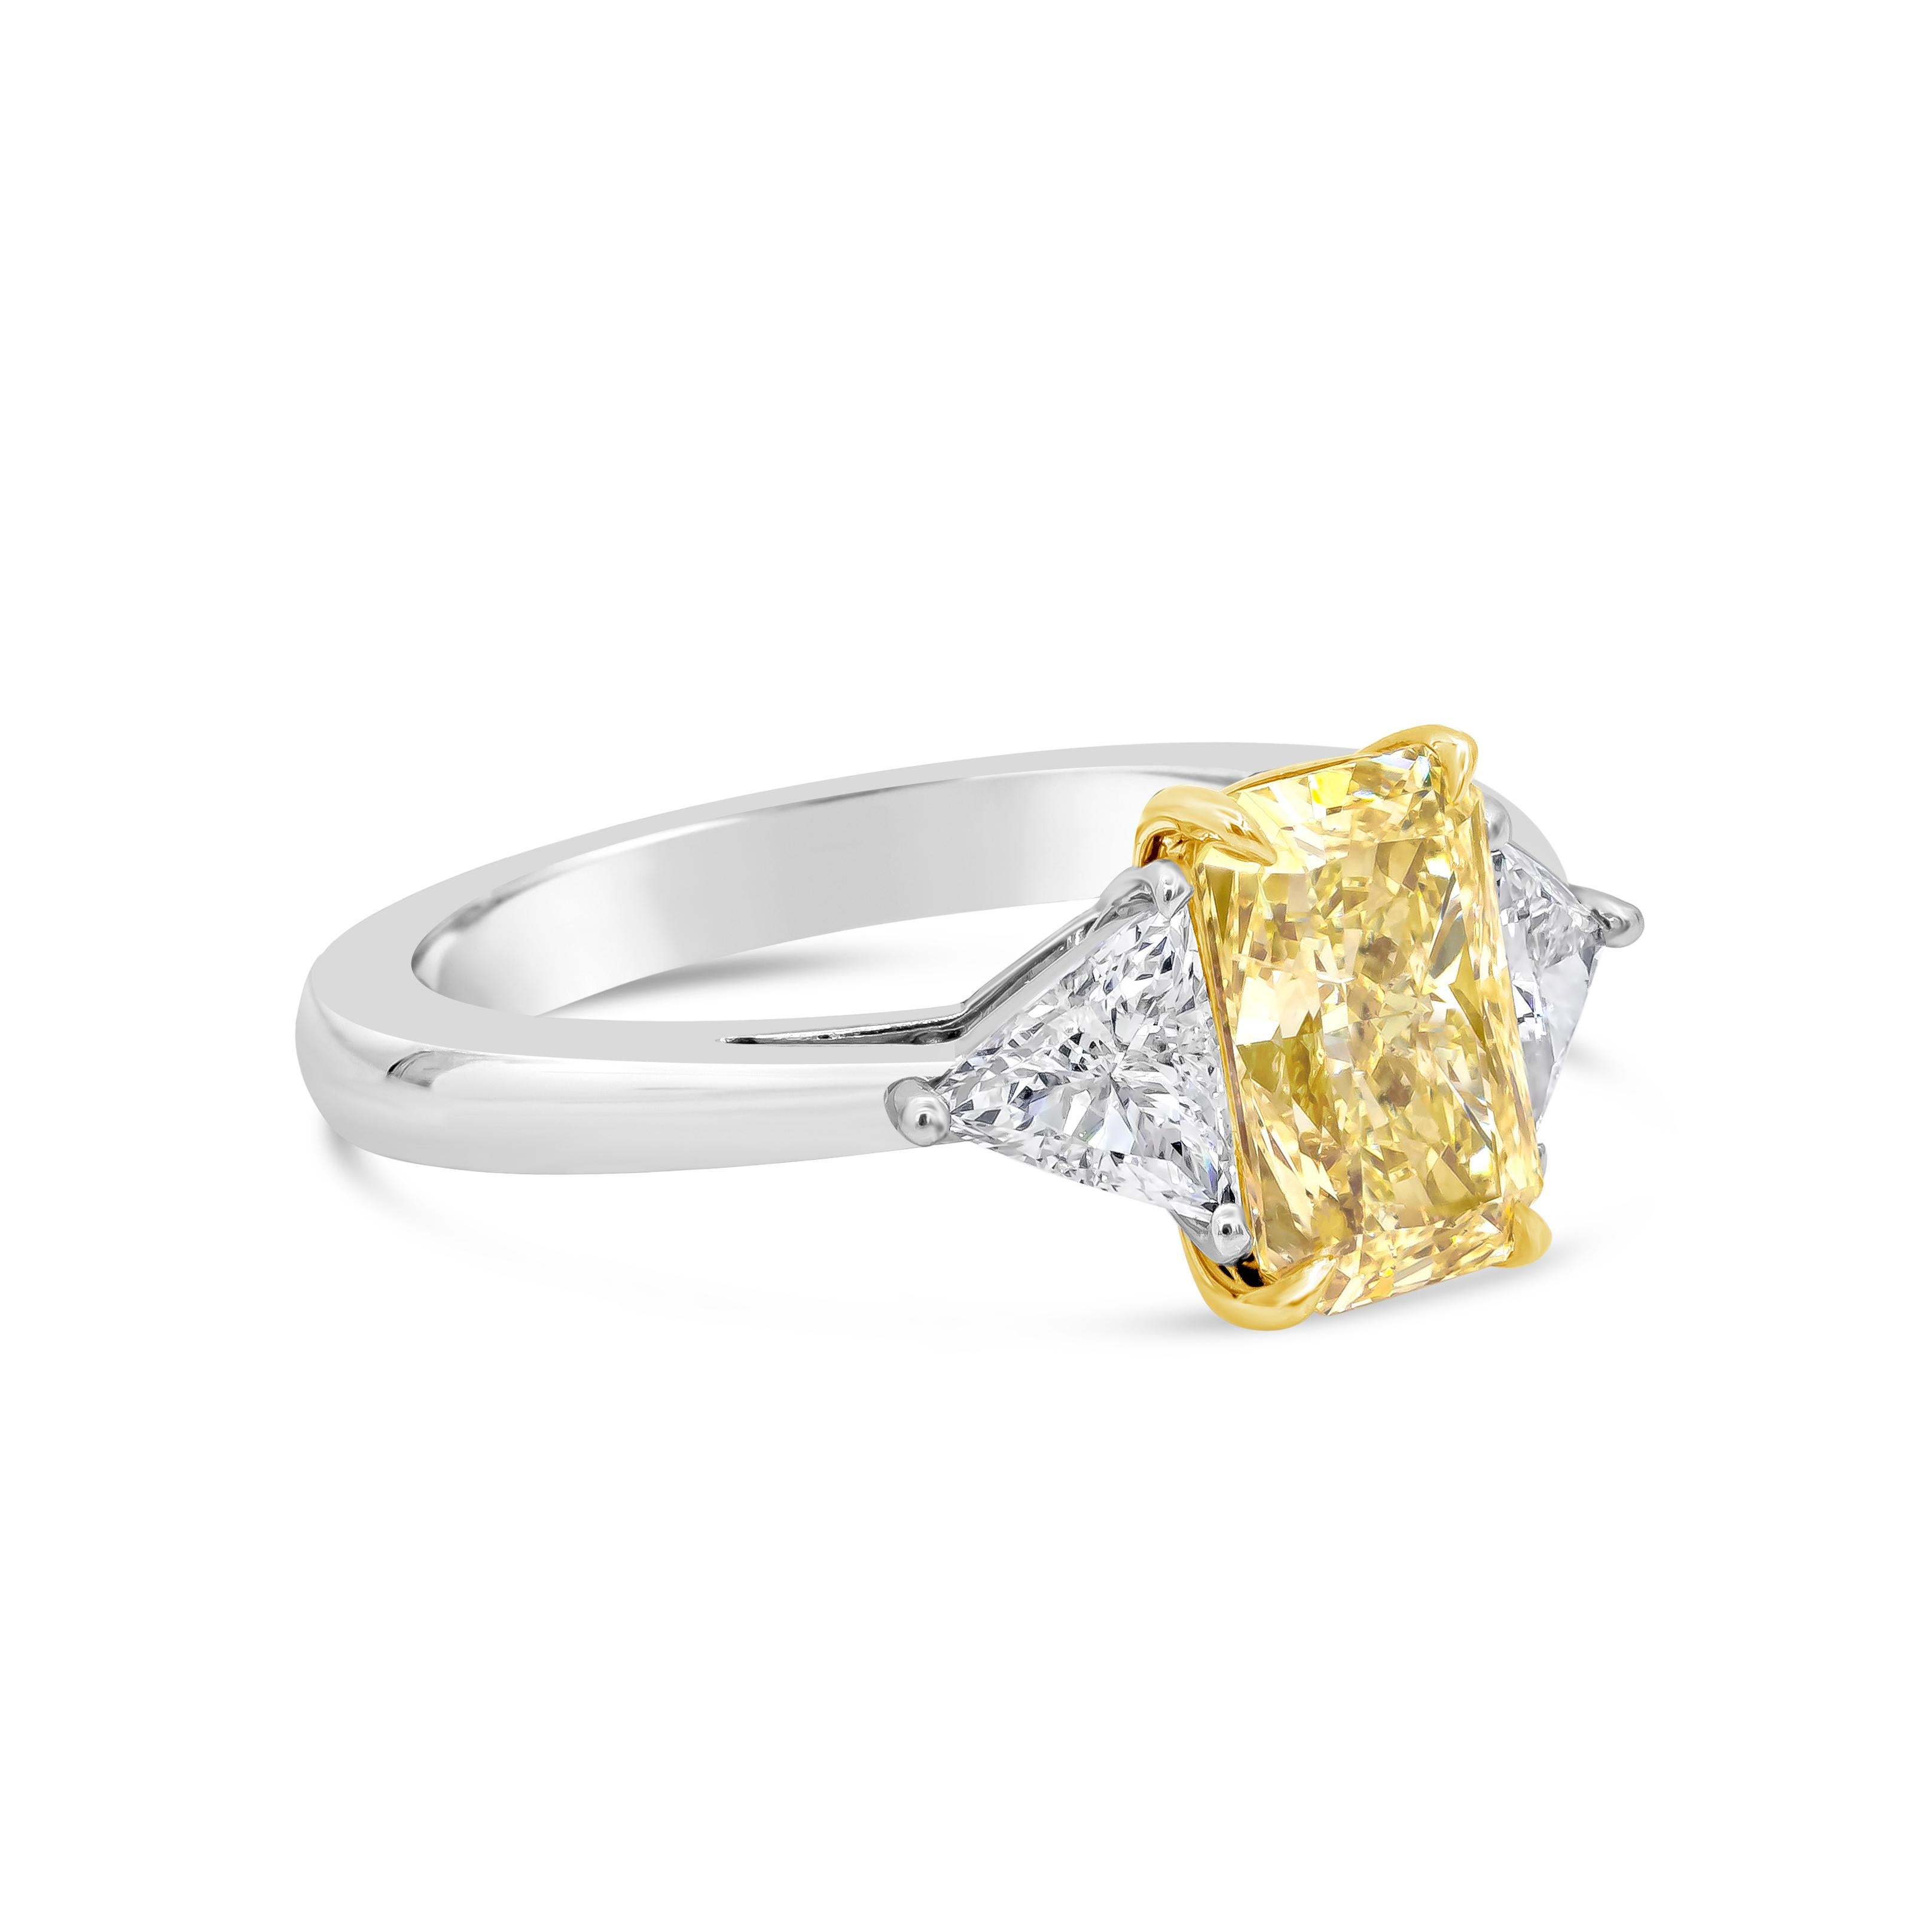 A gorgeous three-stone engagement ring, featuring a 2.02 carats radiant cut diamond certified by GIA as Fancy Yellow color and I1 clarity, set on a four claw prong basket made of 18K yellow gold. Flanked by trillion cut diamonds weighing 0.59 carat